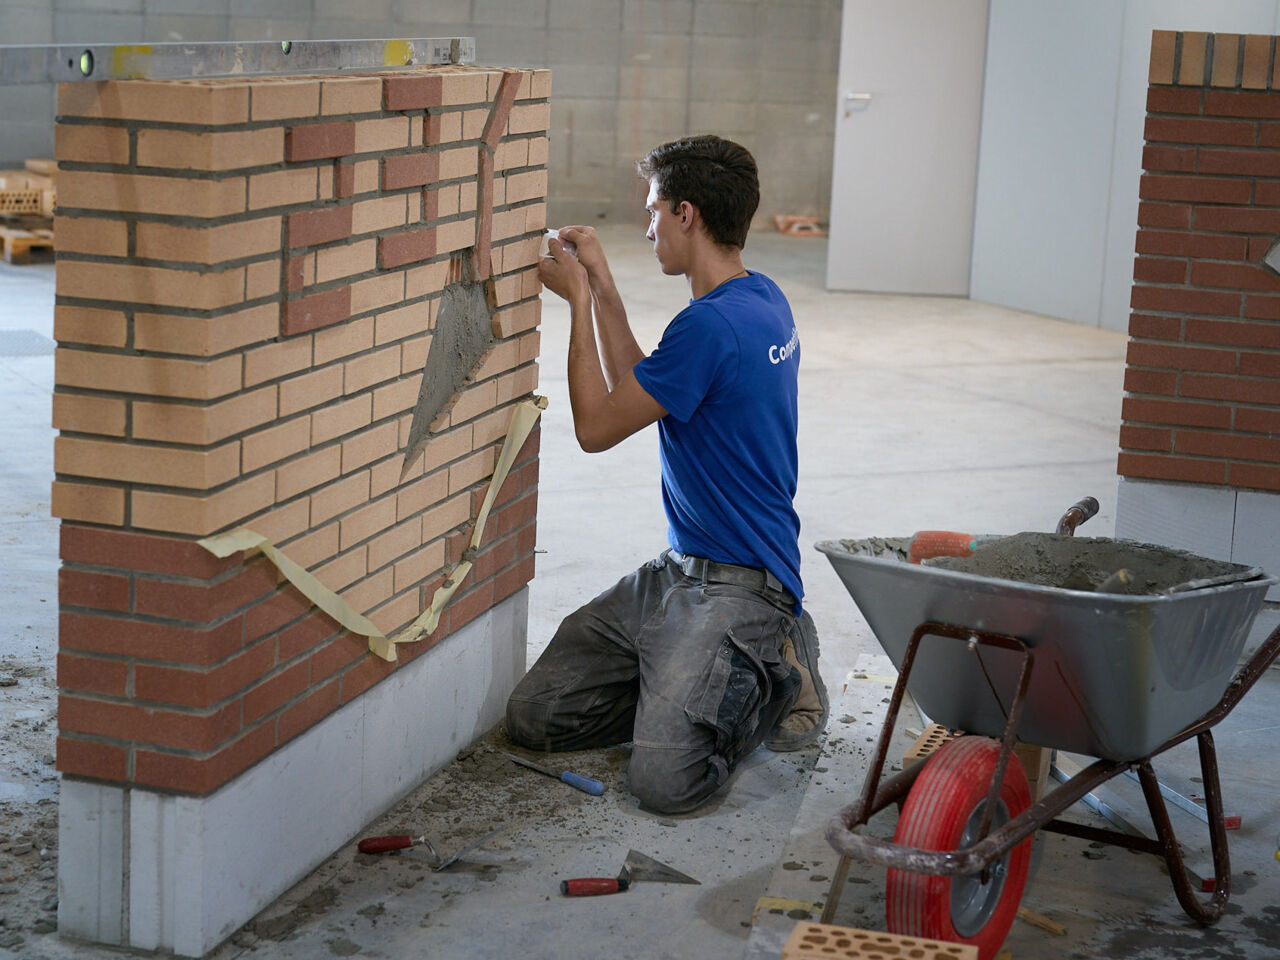 A Competitor builds a brick wall during the WorldSkills Italy nationals in Bolzano, South Tyrol.
